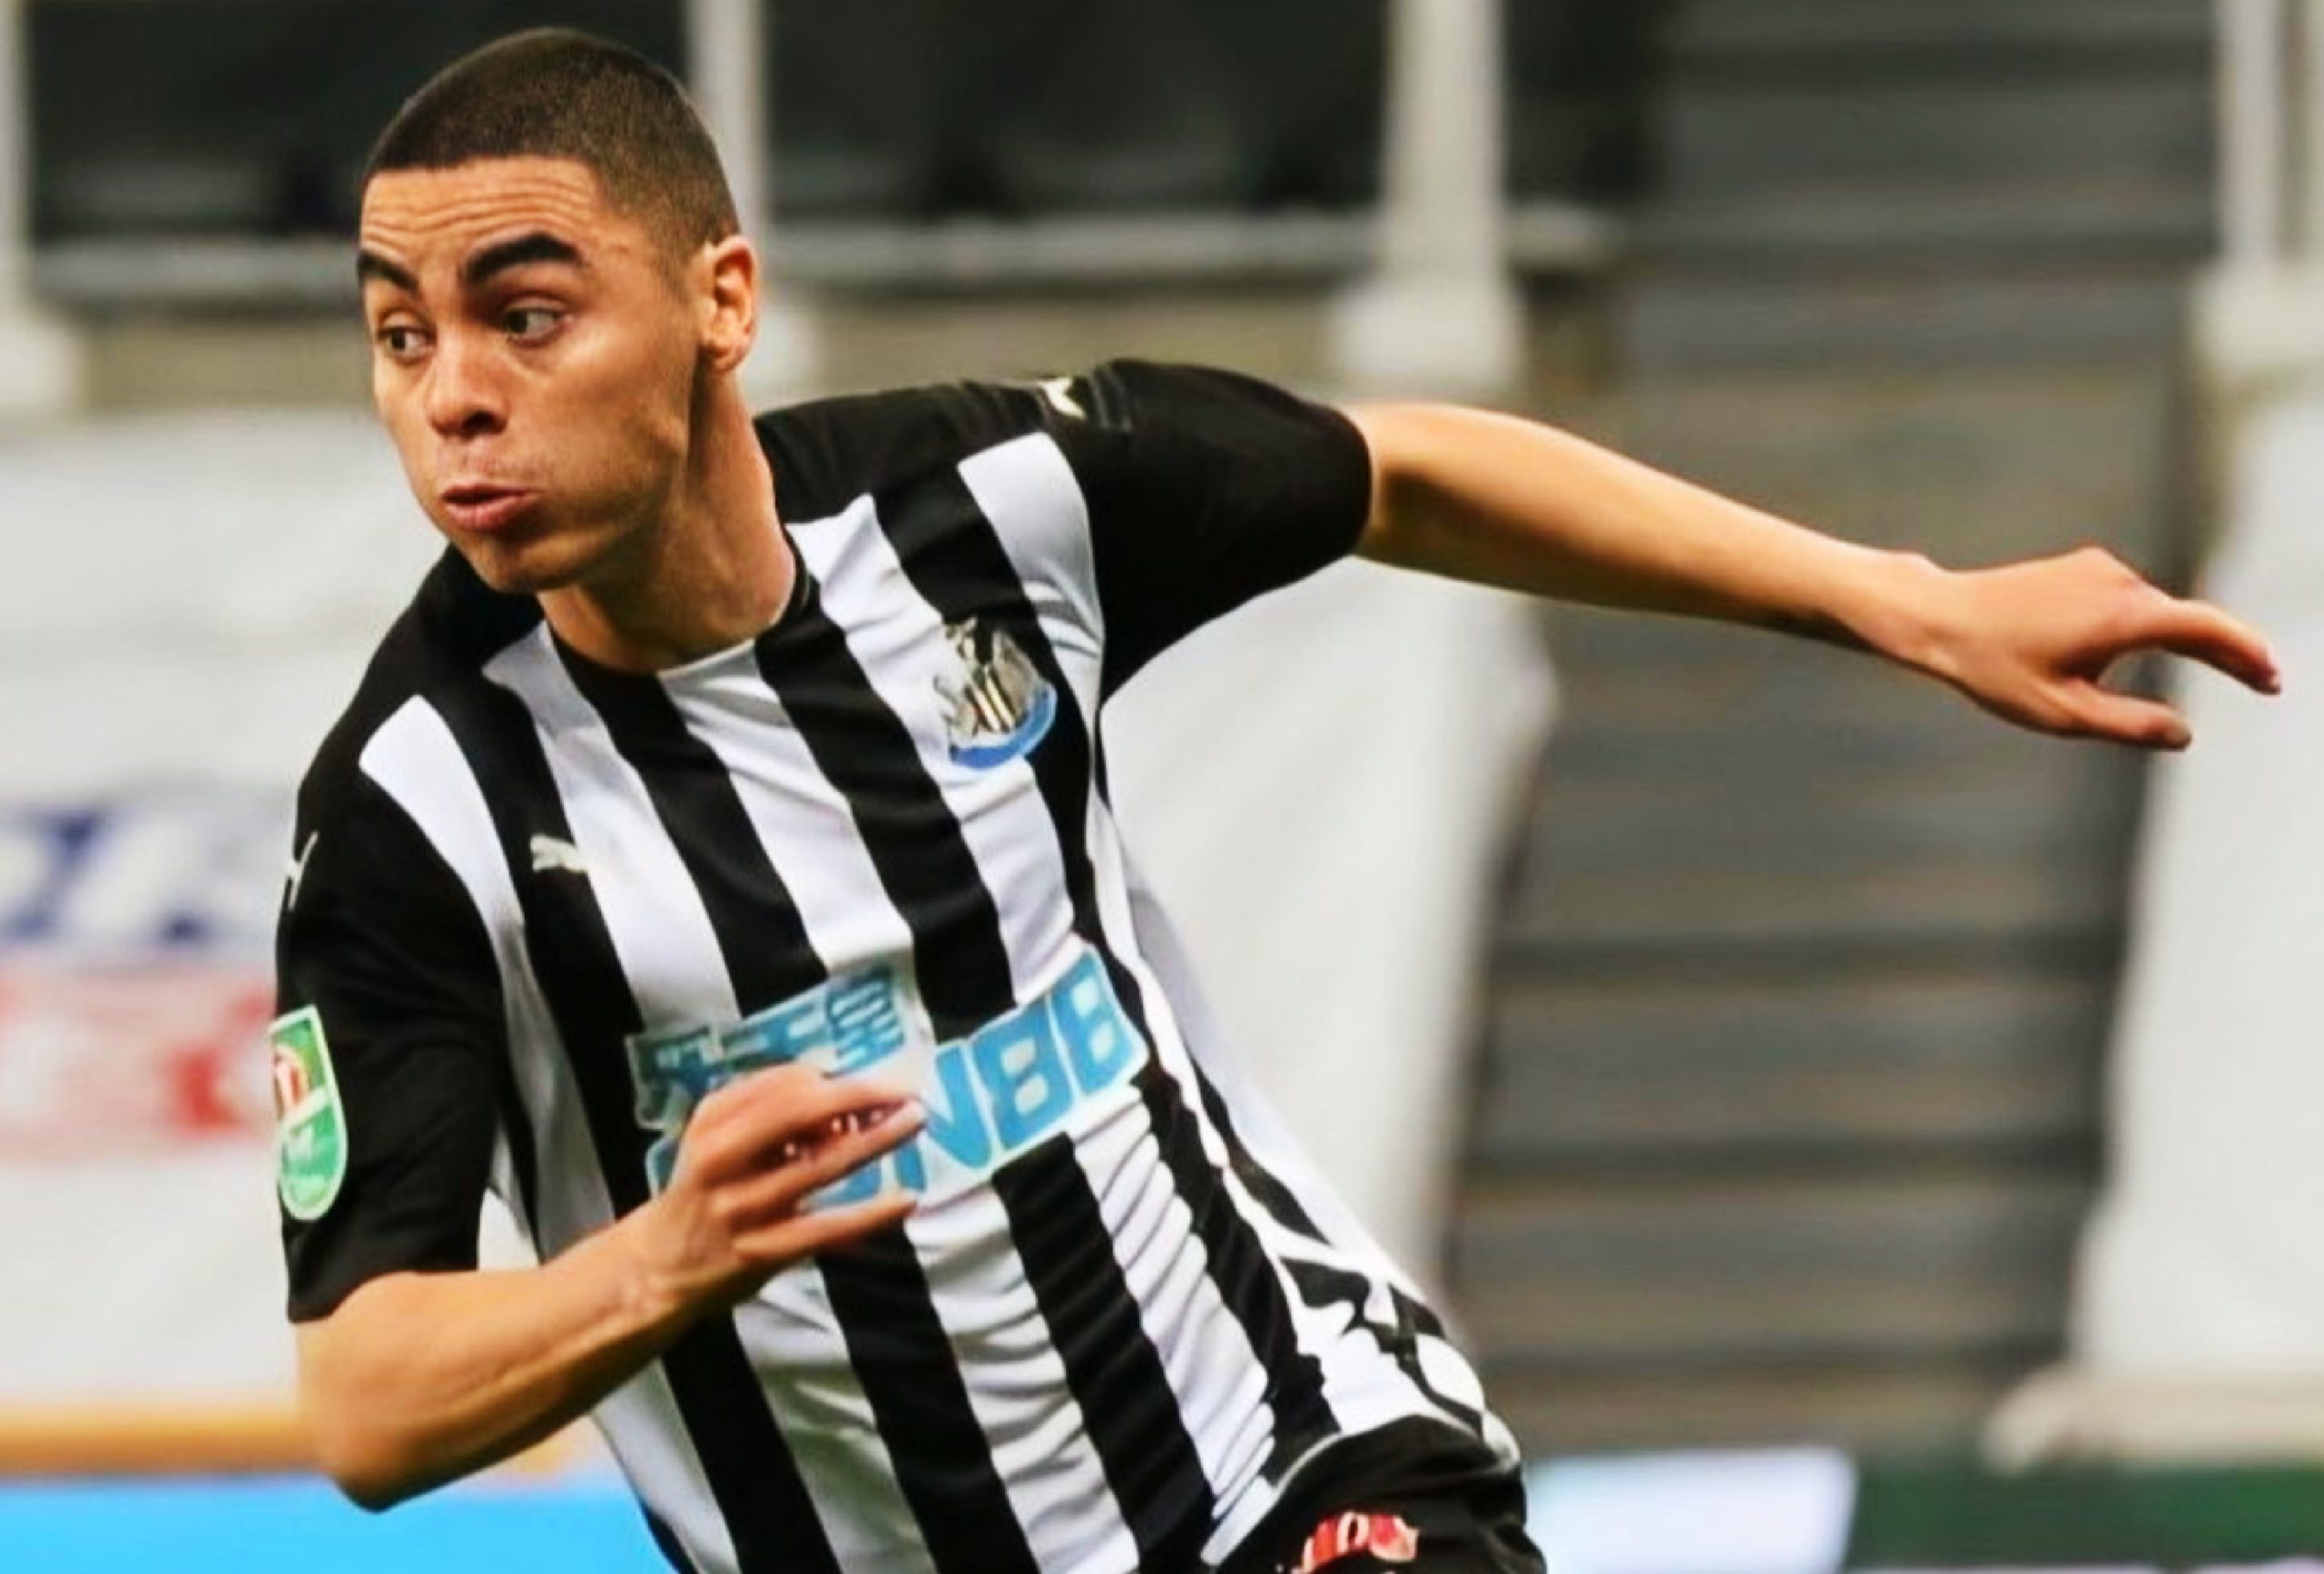 Miguel Almiron pulls off magisterial reverse pass to set up Ryan Fraser’s debut goal for NUFC